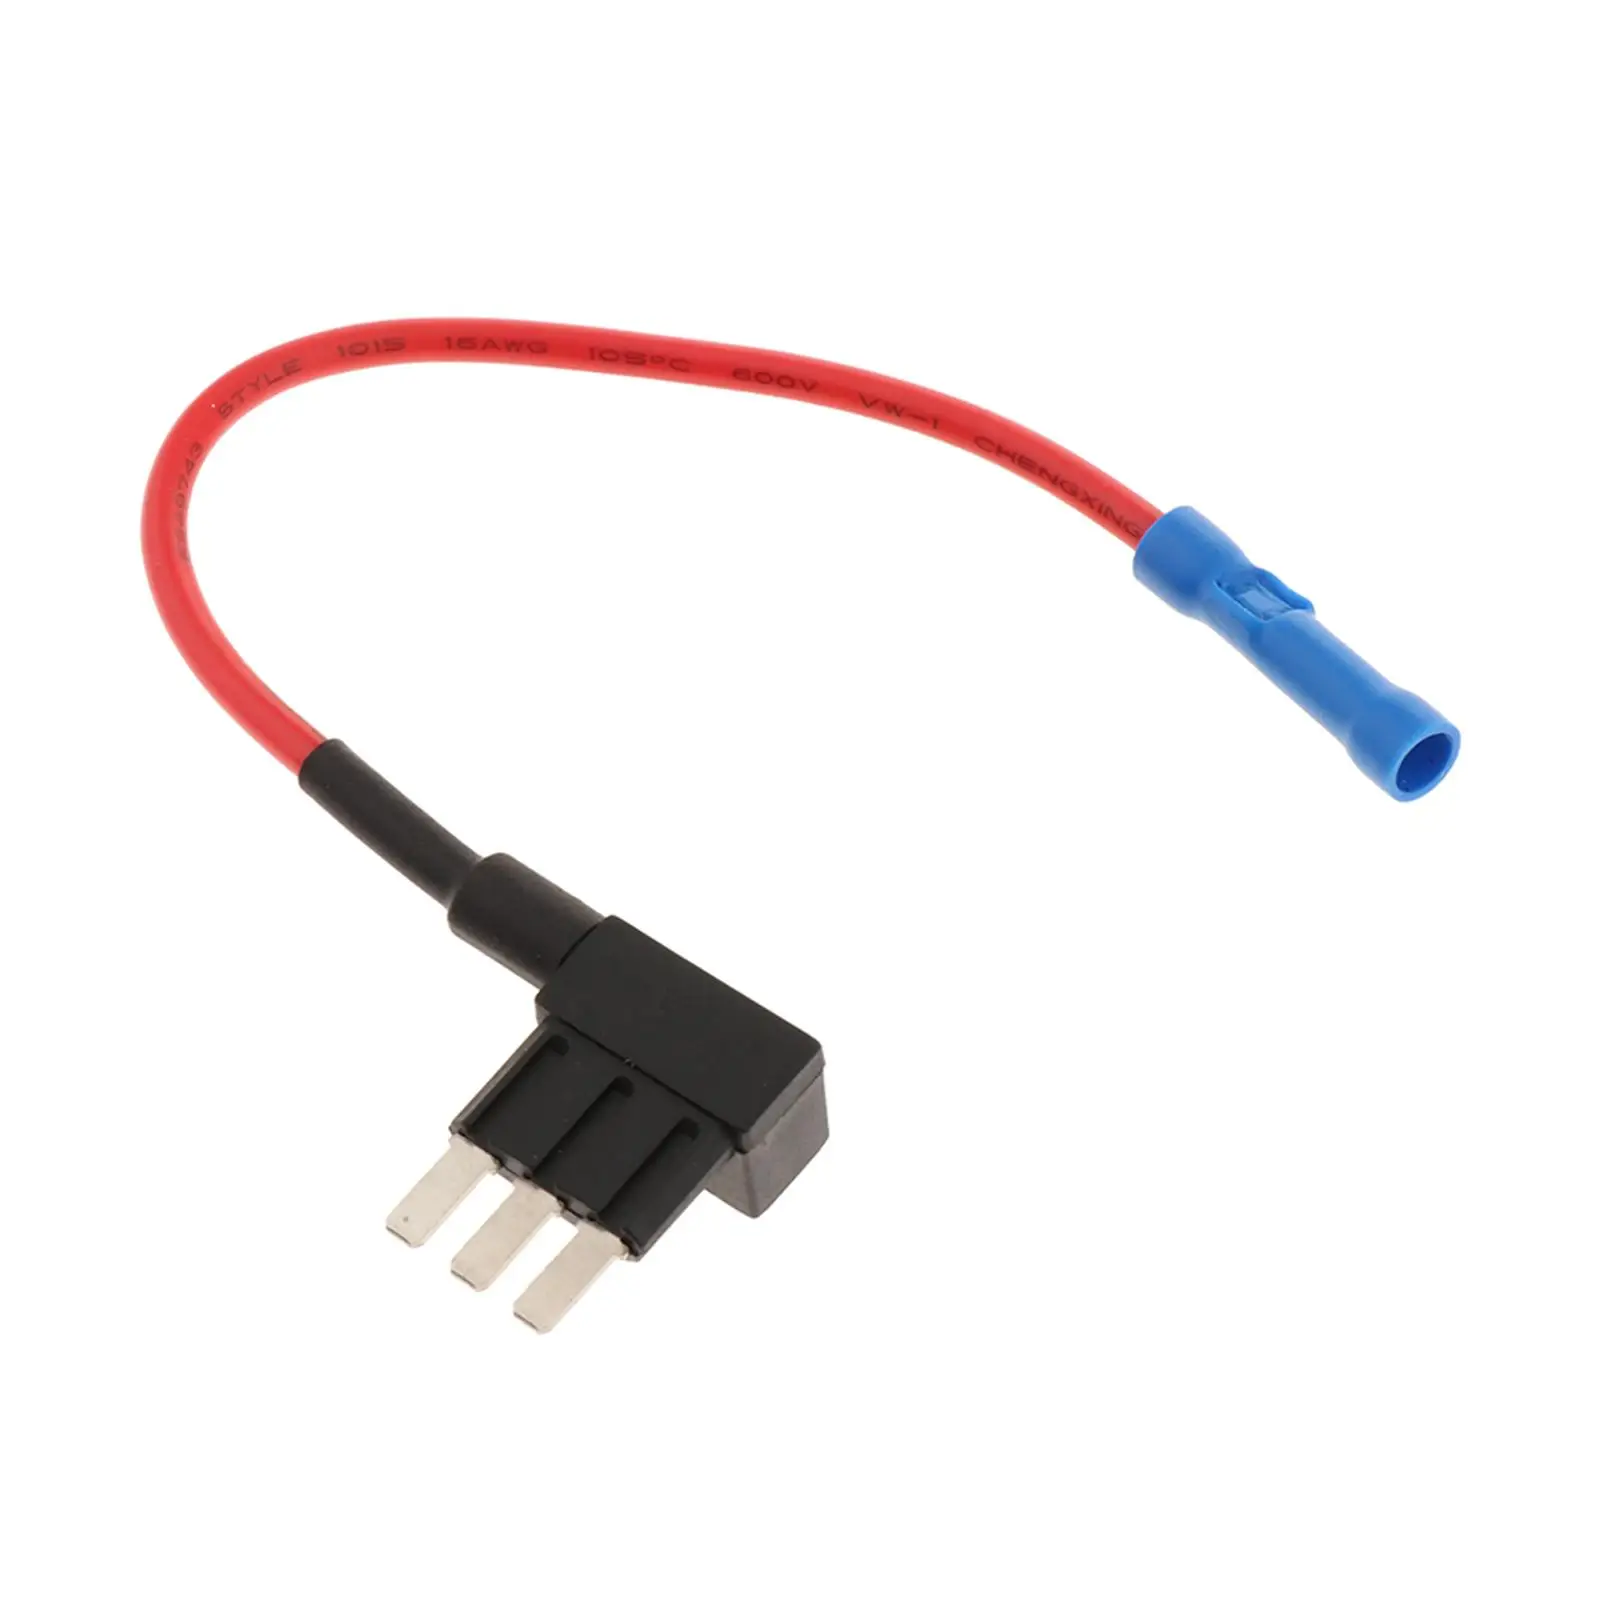 12v Car Add-a-circuit Fuse TAP Adapter Mini ATM APM Blade Fuse Holder (Includes popular 5A Fuse!)